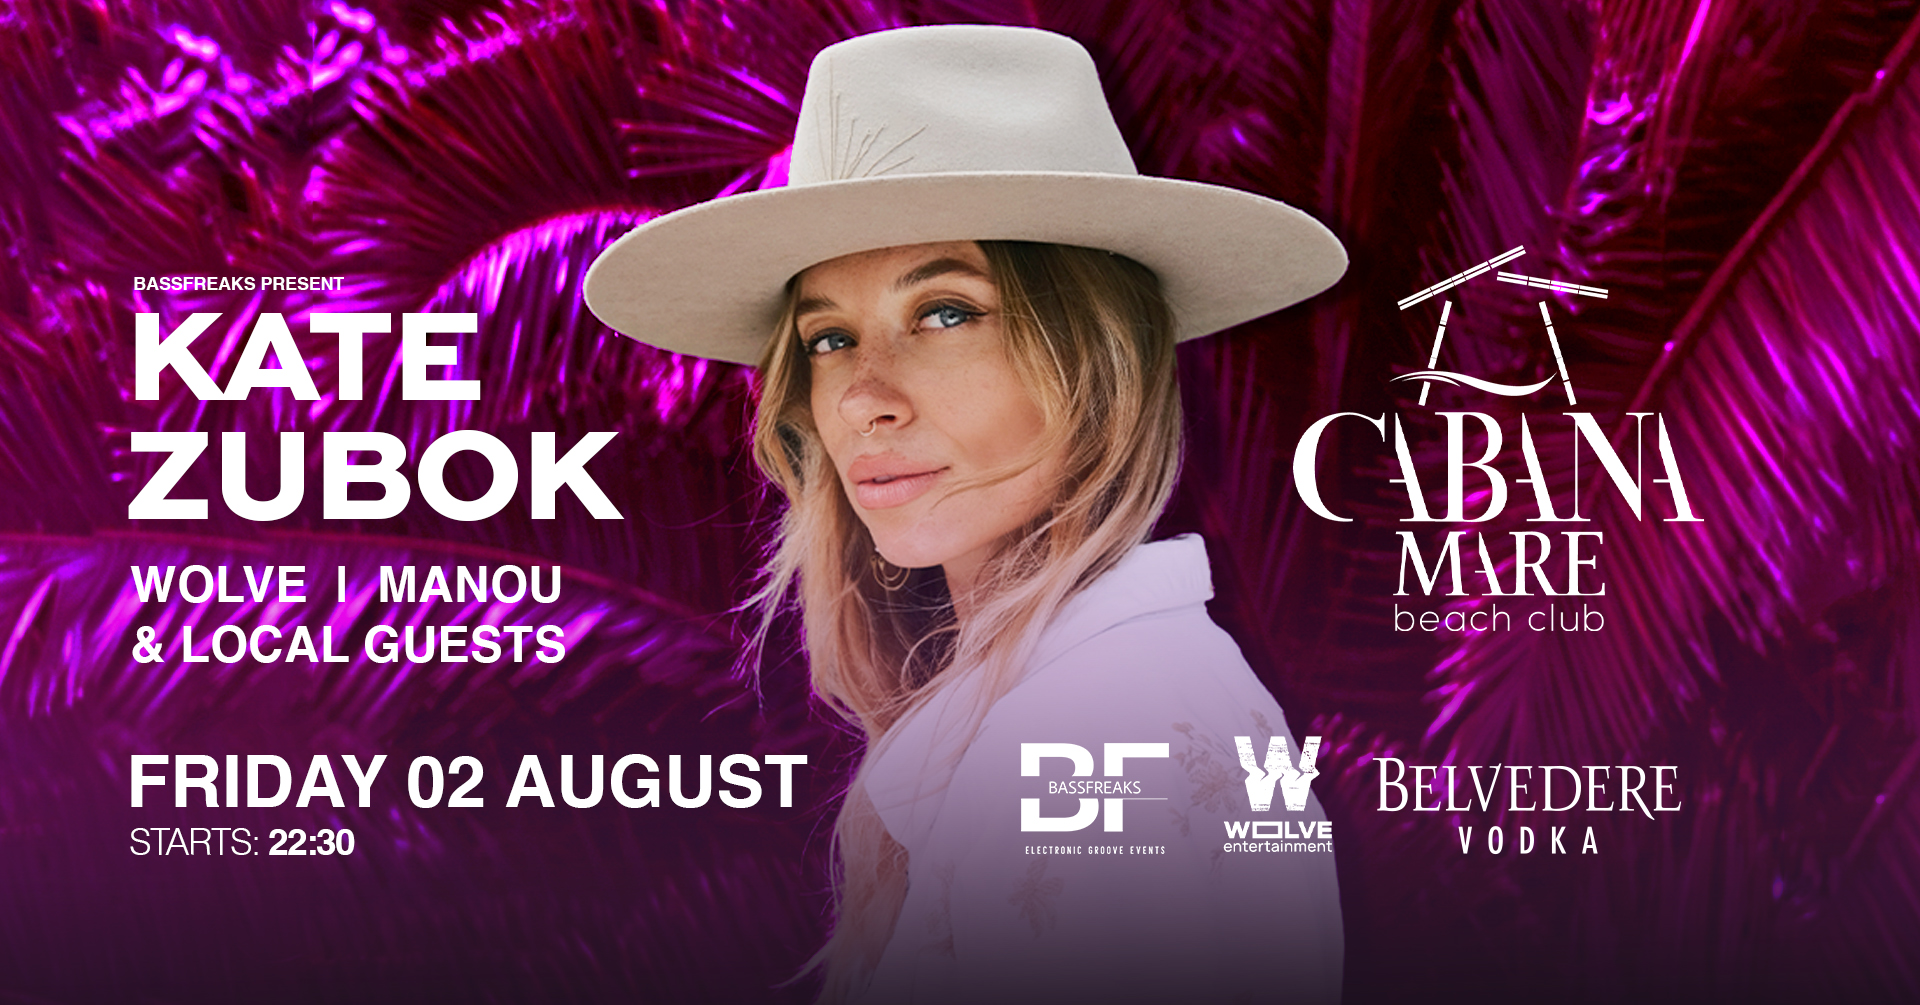 02 AUG Kate Zubok (FR) @ Cabana Mare (Produced by Bassfreaks)